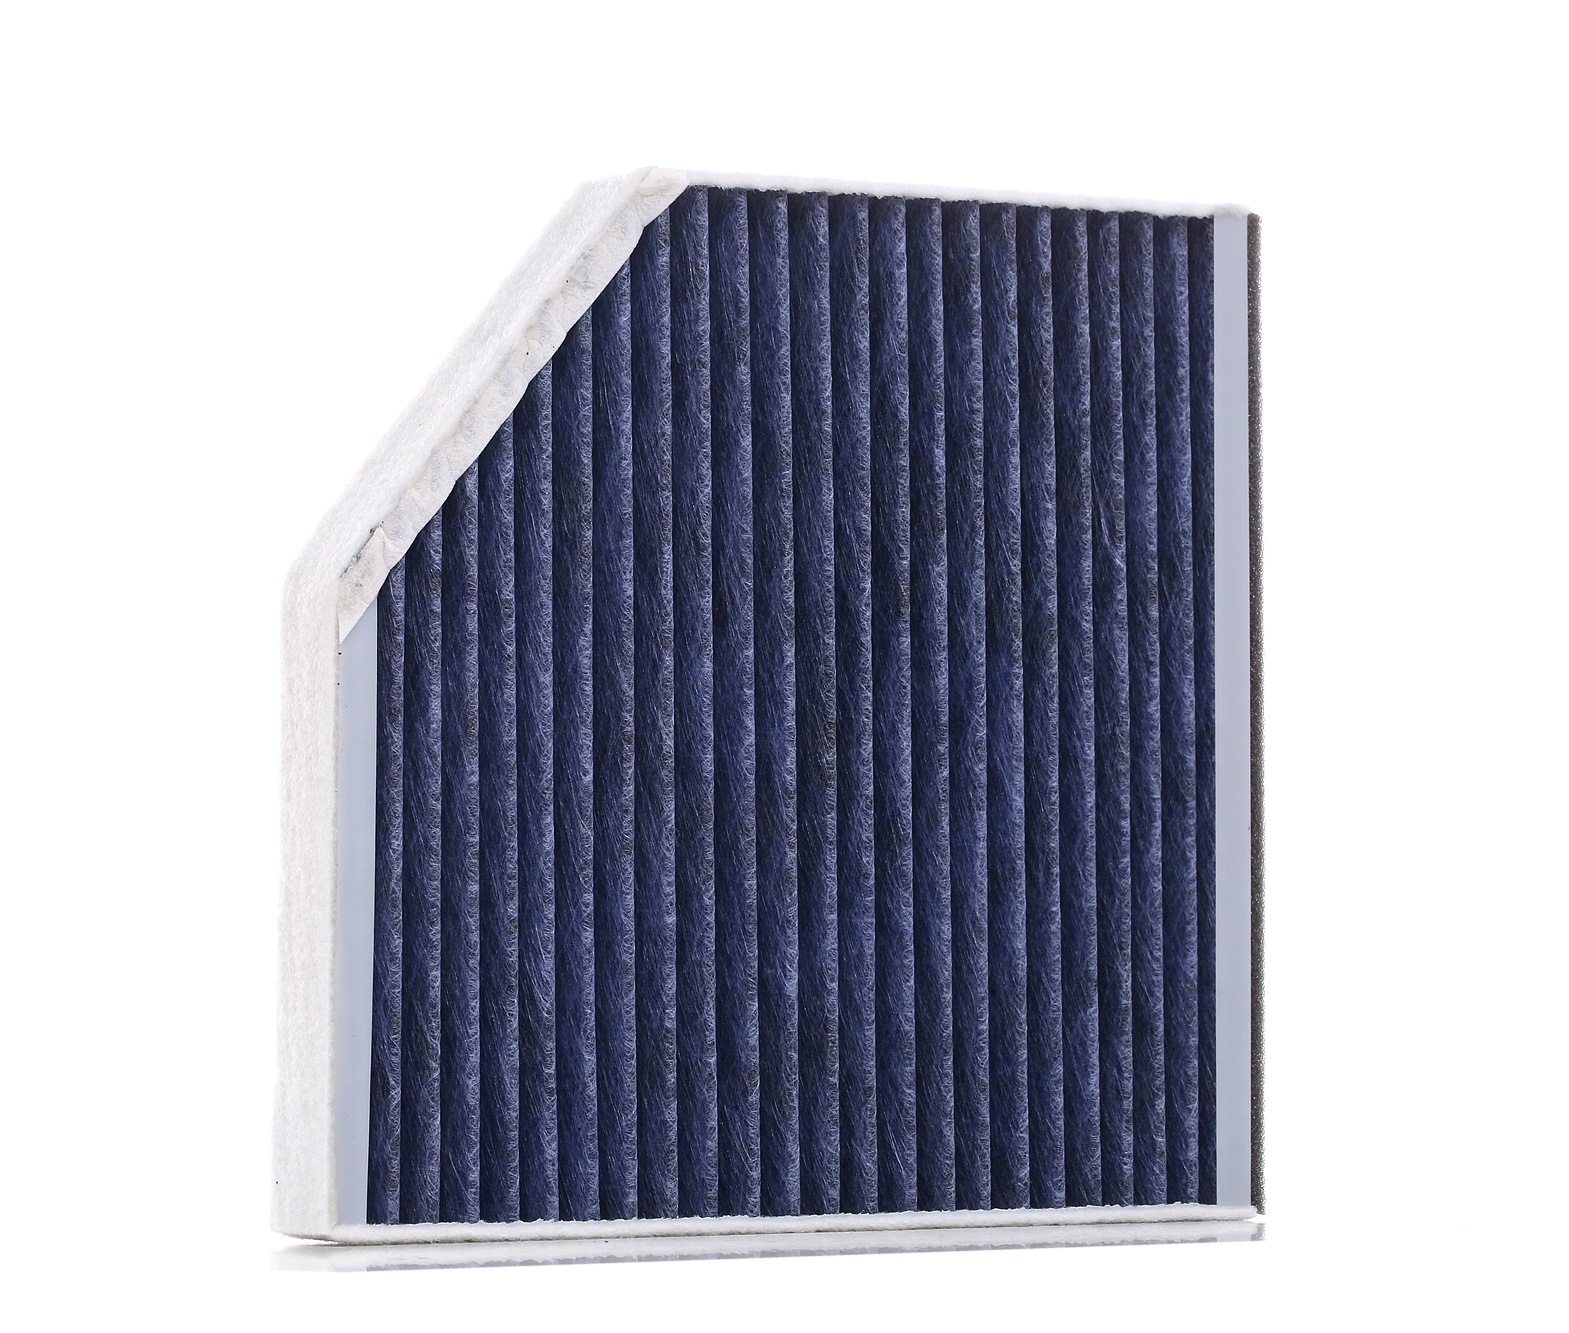 Audi A8 Air conditioning filter 13842801 MEYLE 112 324 0017 online buy